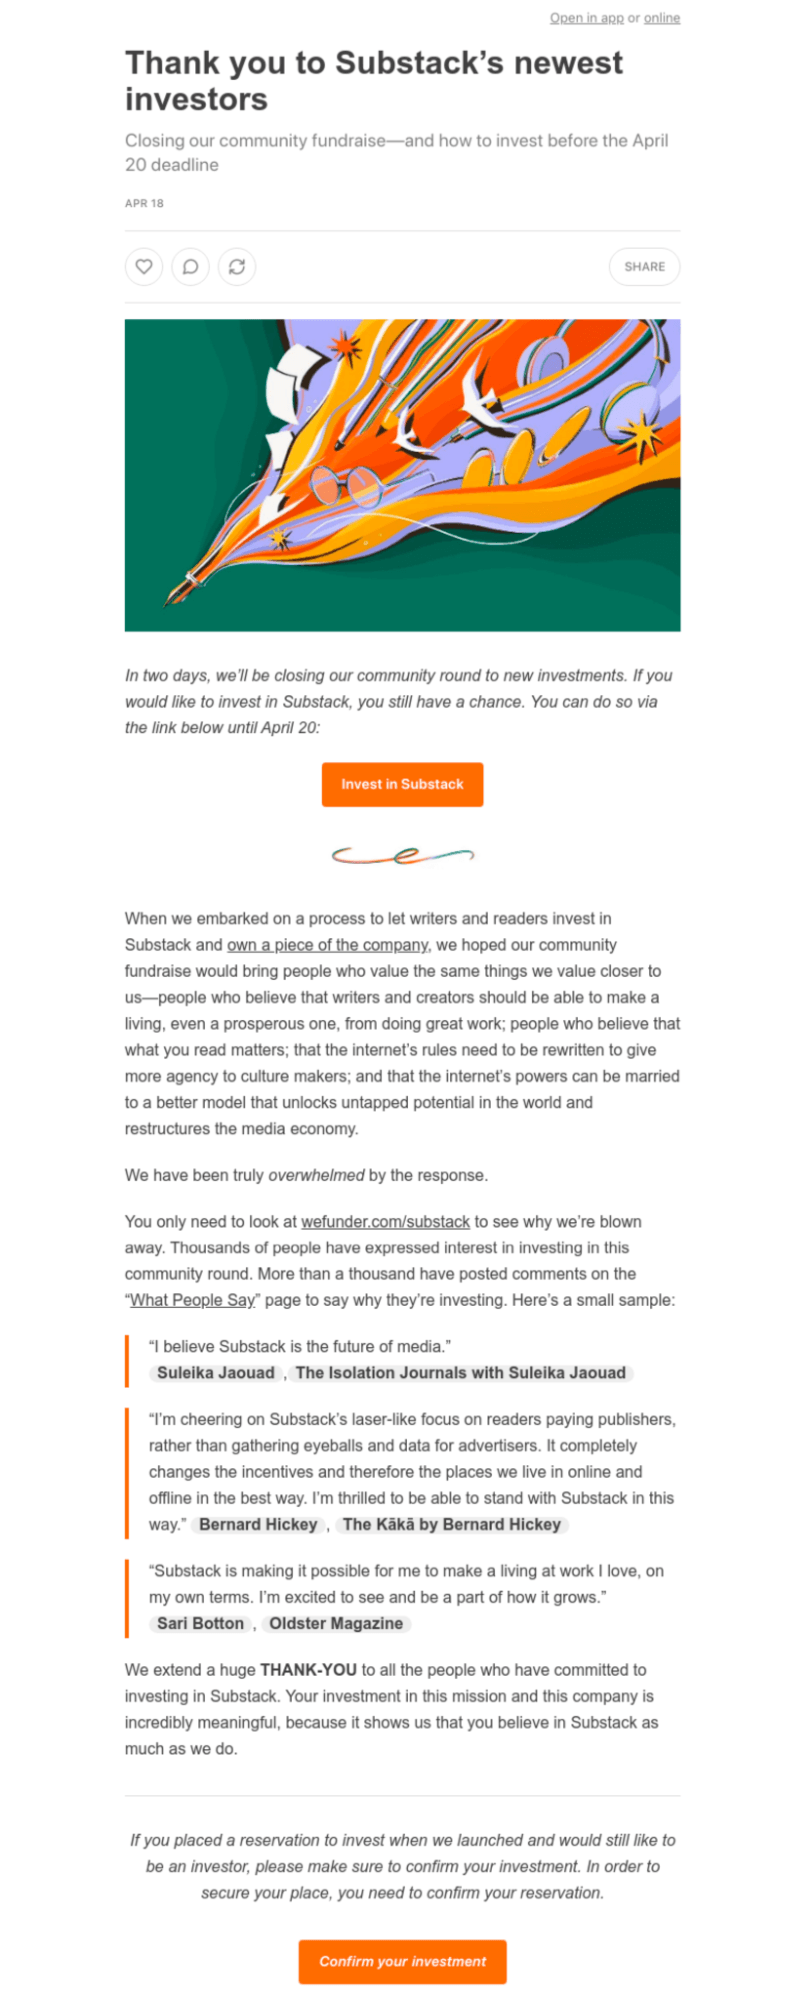 Email Engagement Content Ideas: Screenshot of Substack's email talking about their newest investors